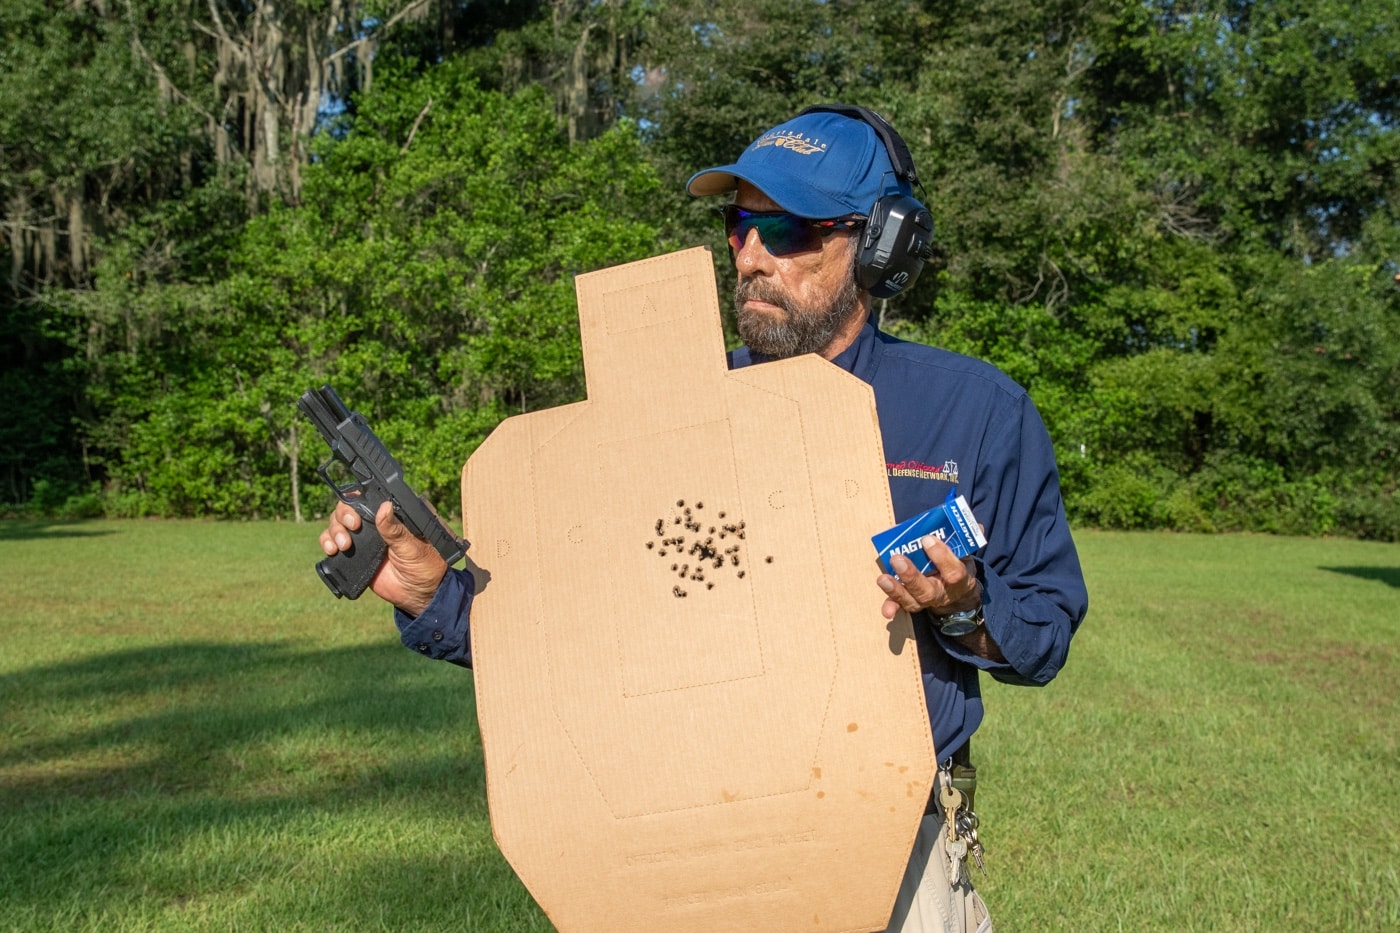 The author poses with his qualification target that he shot with the new Springfield Armory Echelon pistol. Equipped with night sights, the gun was accurate and fast to shoot. He found it was a joy to shoot.